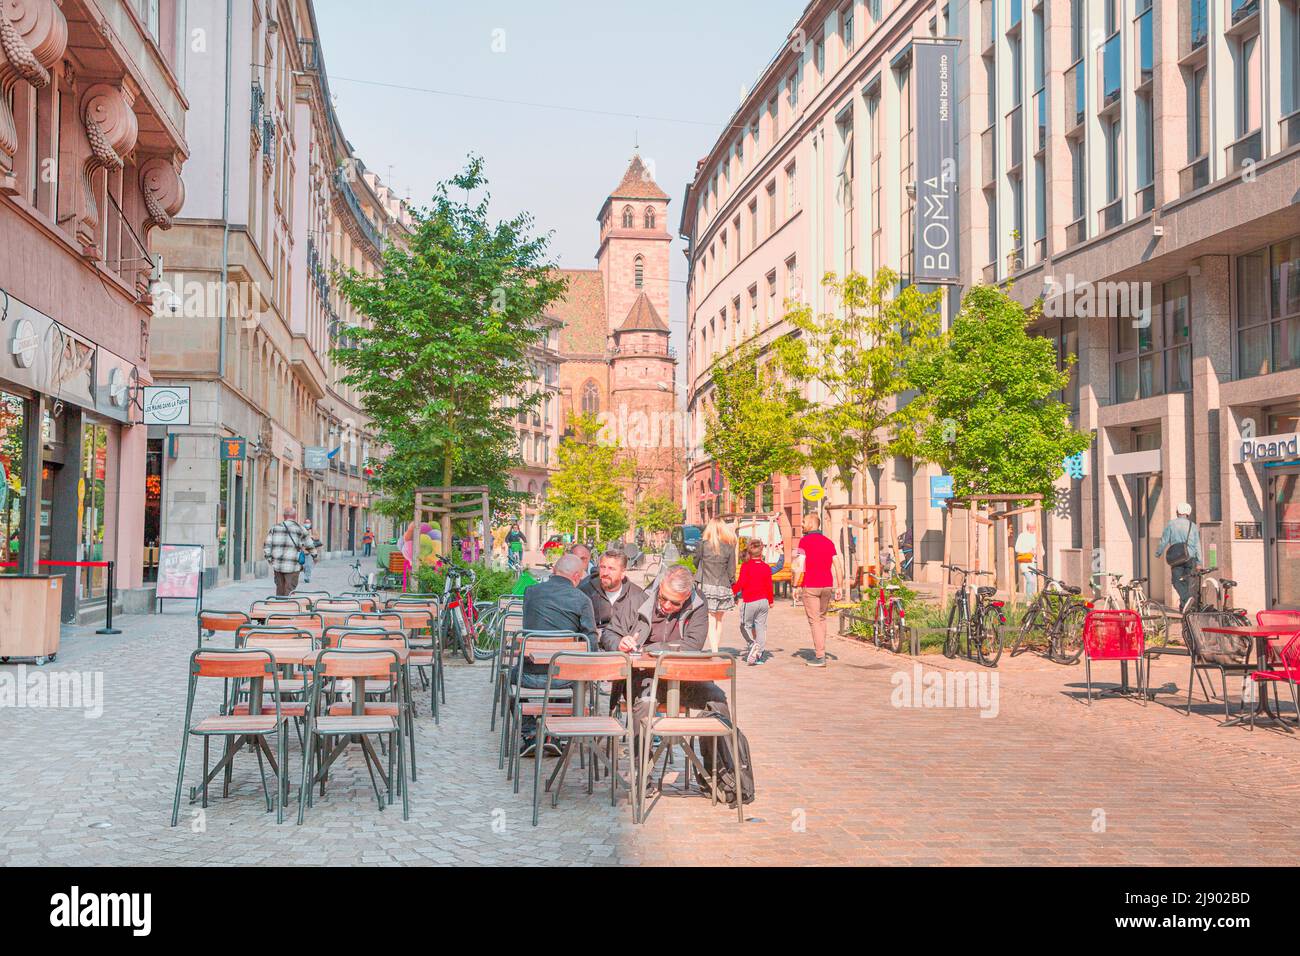 2 of May 2022, Strasbourg, France. Saint Thomas church and people, sitting in the restaurant. Stock Photo